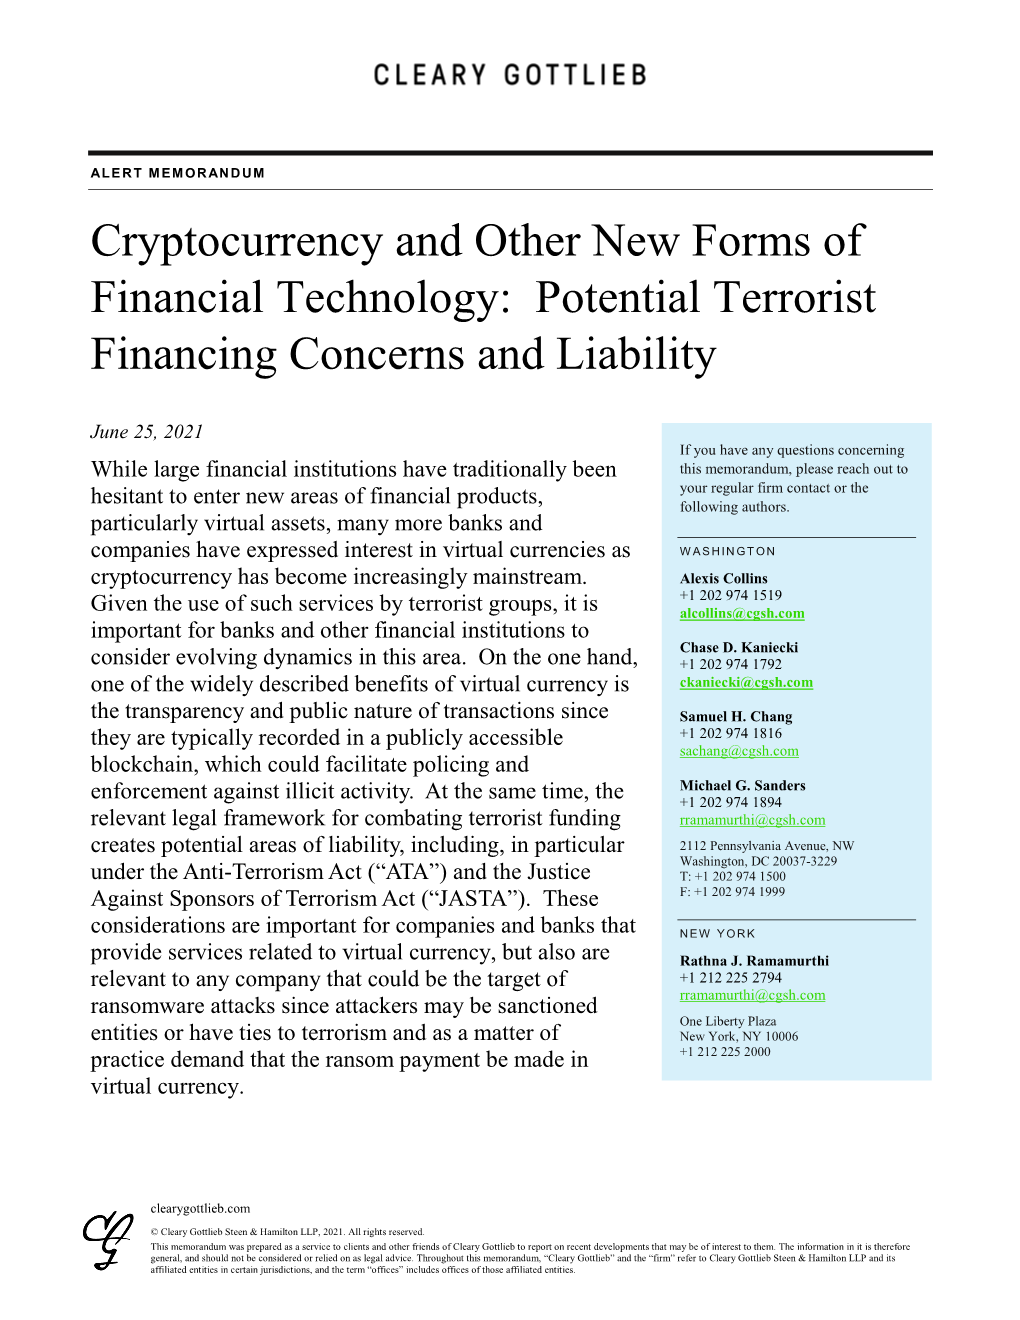 Potential Terrorist Financing Concerns and Liability